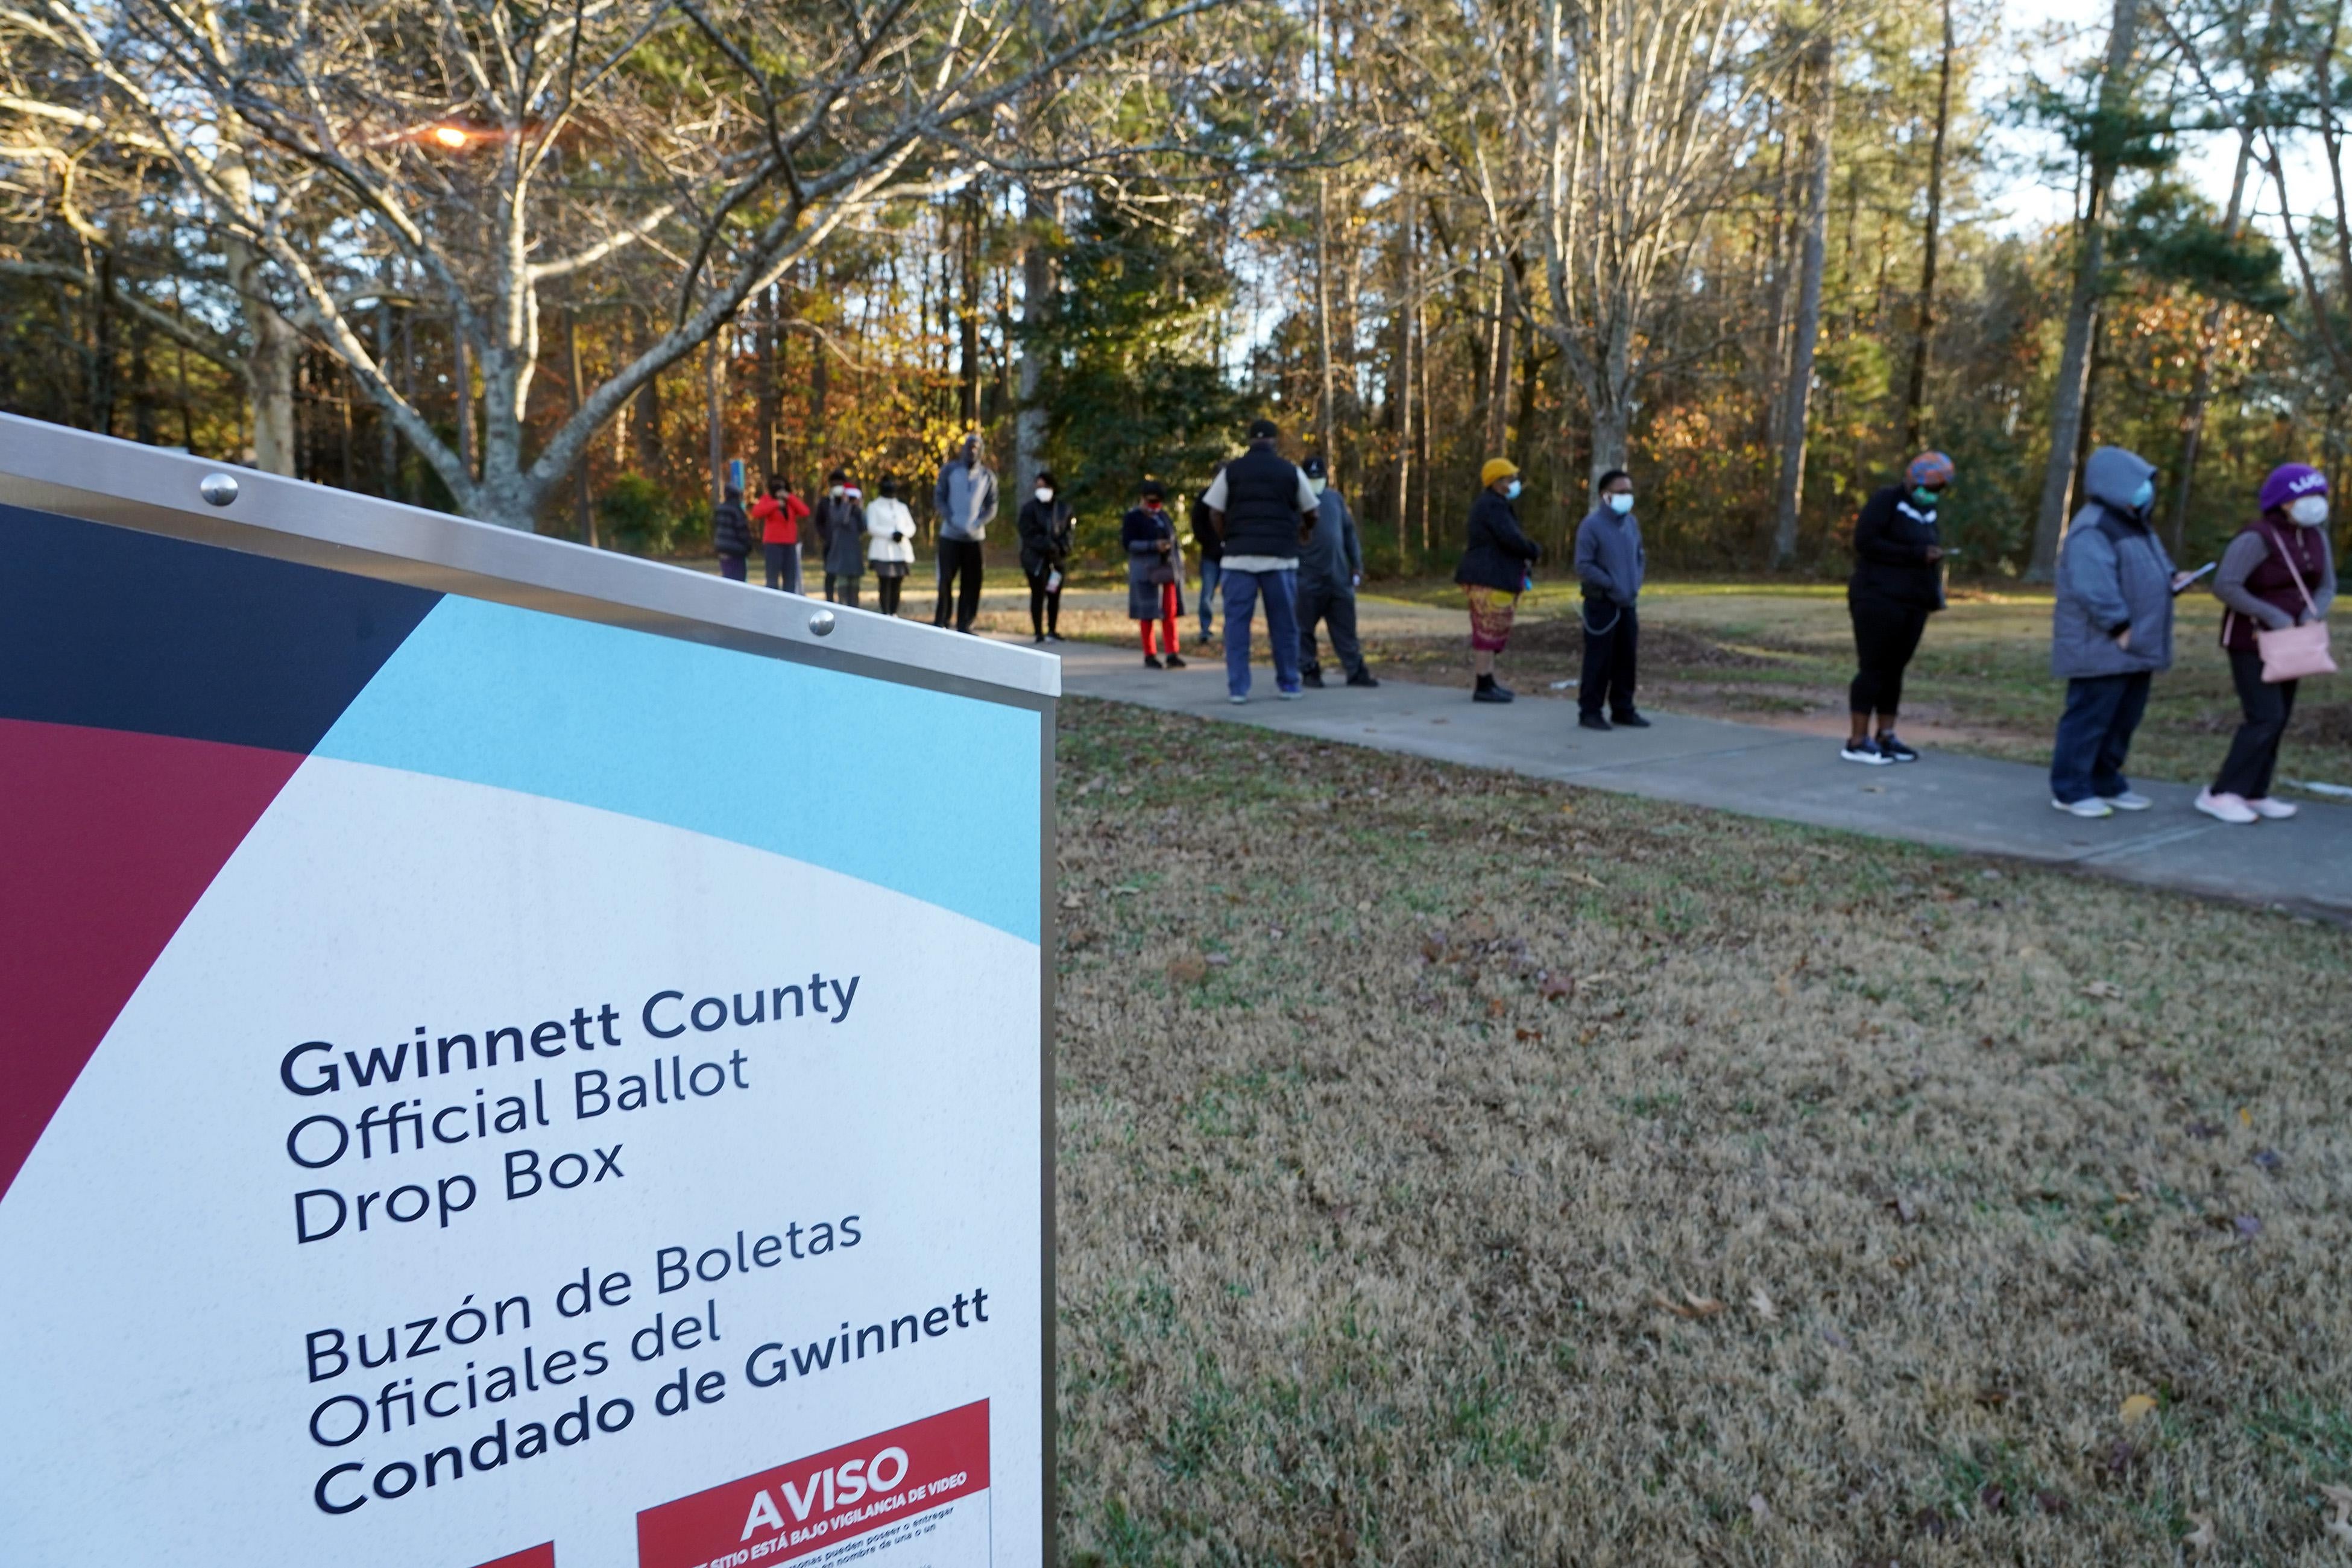 Voters stand in line outside a Georgia polling location with a ballot dropbox in the foreground.